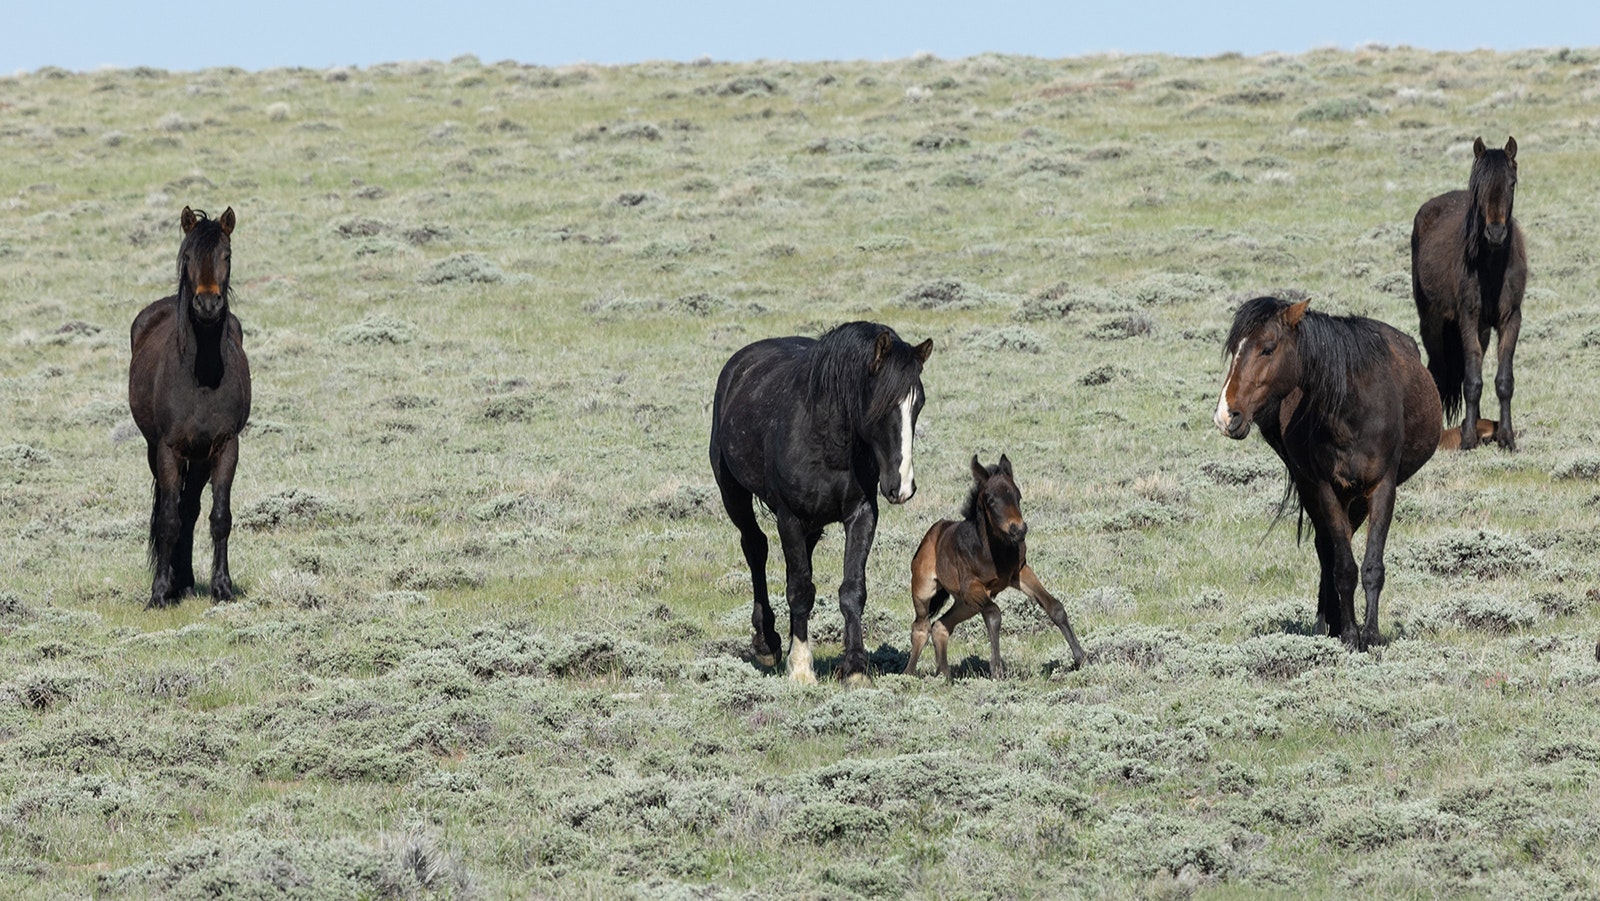 A foal mustang, just days old, gains strength in its legs on the open range near Jeffrey City.